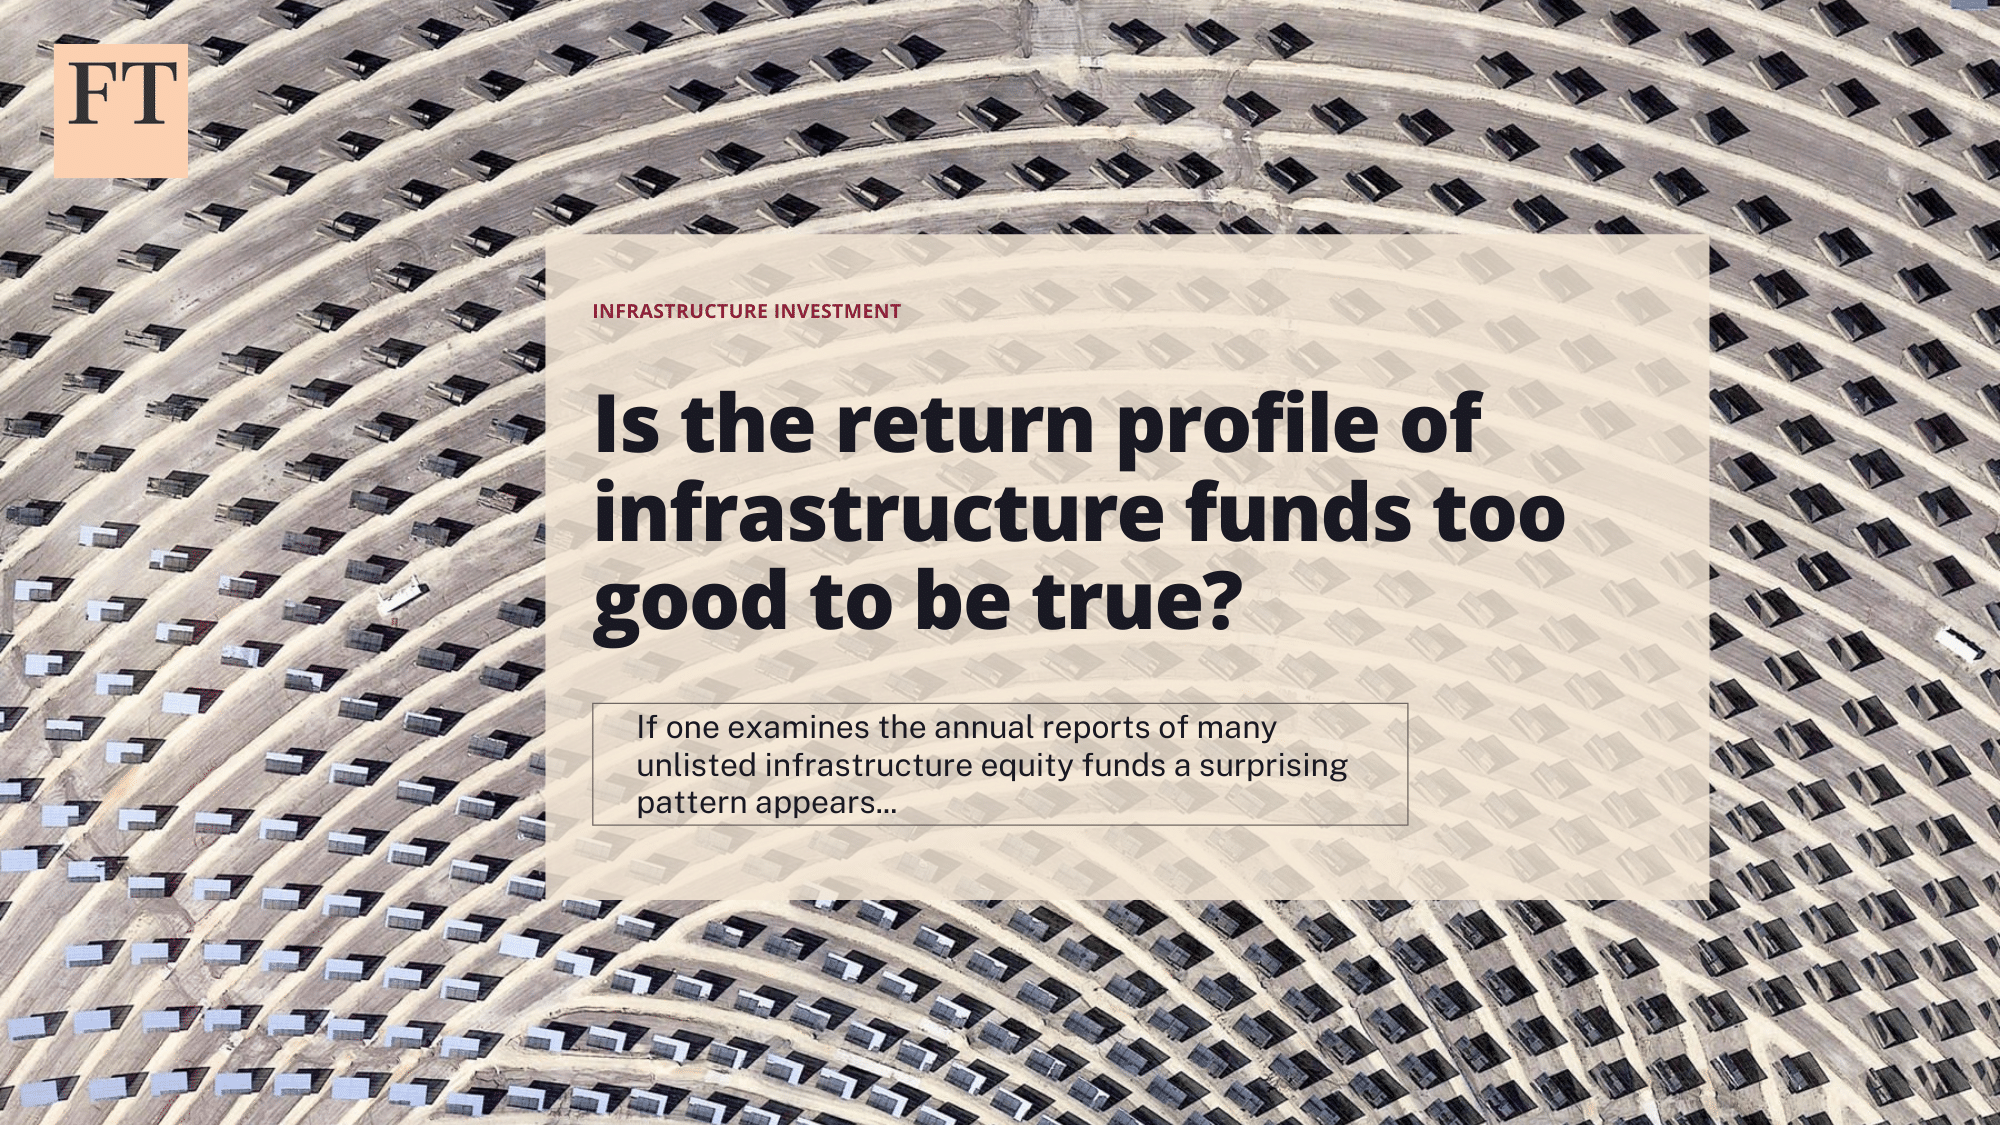 Featured image for “FT: Is the return profile of infra funds too good to be true?”